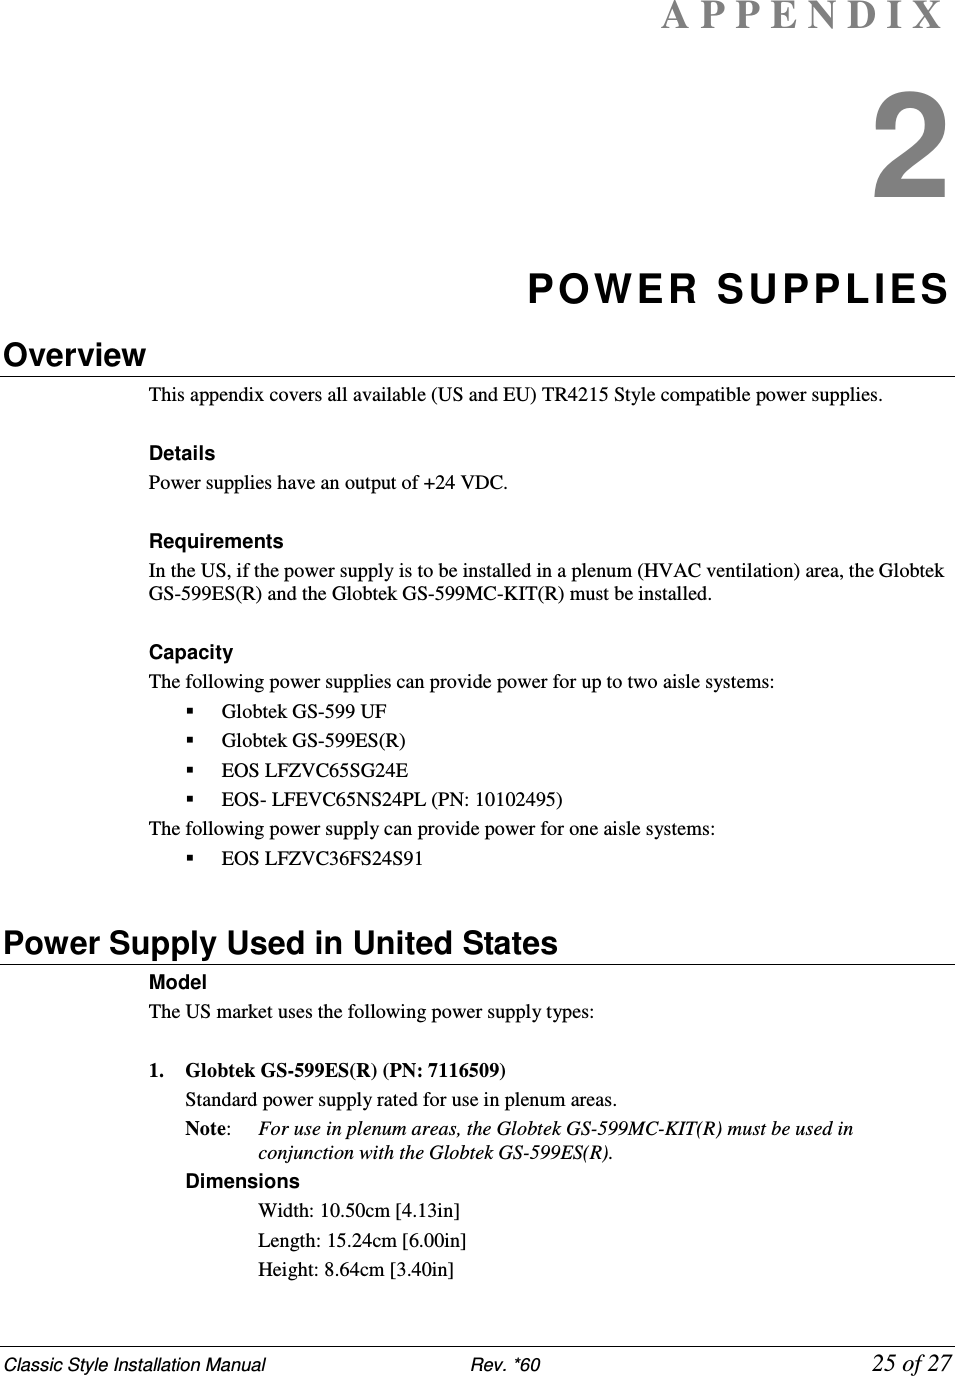 Classic Style Installation Manual                           Rev. *60             25 of 27 A P P E N D I X  2 POWER SUPPLIES Overview This appendix covers all available (US and EU) TR4215 Style compatible power supplies.  Details Power supplies have an output of +24 VDC.  Requirements In the US, if the power supply is to be installed in a plenum (HVAC ventilation) area, the Globtek GS-599ES(R) and the Globtek GS-599MC-KIT(R) must be installed.  Capacity The following power supplies can provide power for up to two aisle systems:  Globtek GS-599 UF  Globtek GS-599ES(R)  EOS LFZVC65SG24E  EOS- LFEVC65NS24PL (PN: 10102495) The following power supply can provide power for one aisle systems:  EOS LFZVC36FS24S91  Power Supply Used in United States Model  The US market uses the following power supply types:  1. Globtek GS-599ES(R) (PN: 7116509) Standard power supply rated for use in plenum areas.  Note:   For use in plenum areas, the Globtek GS-599MC-KIT(R) must be used in conjunction with the Globtek GS-599ES(R).  Dimensions  Width: 10.50cm [4.13in]  Length: 15.24cm [6.00in]  Height: 8.64cm [3.40in] 